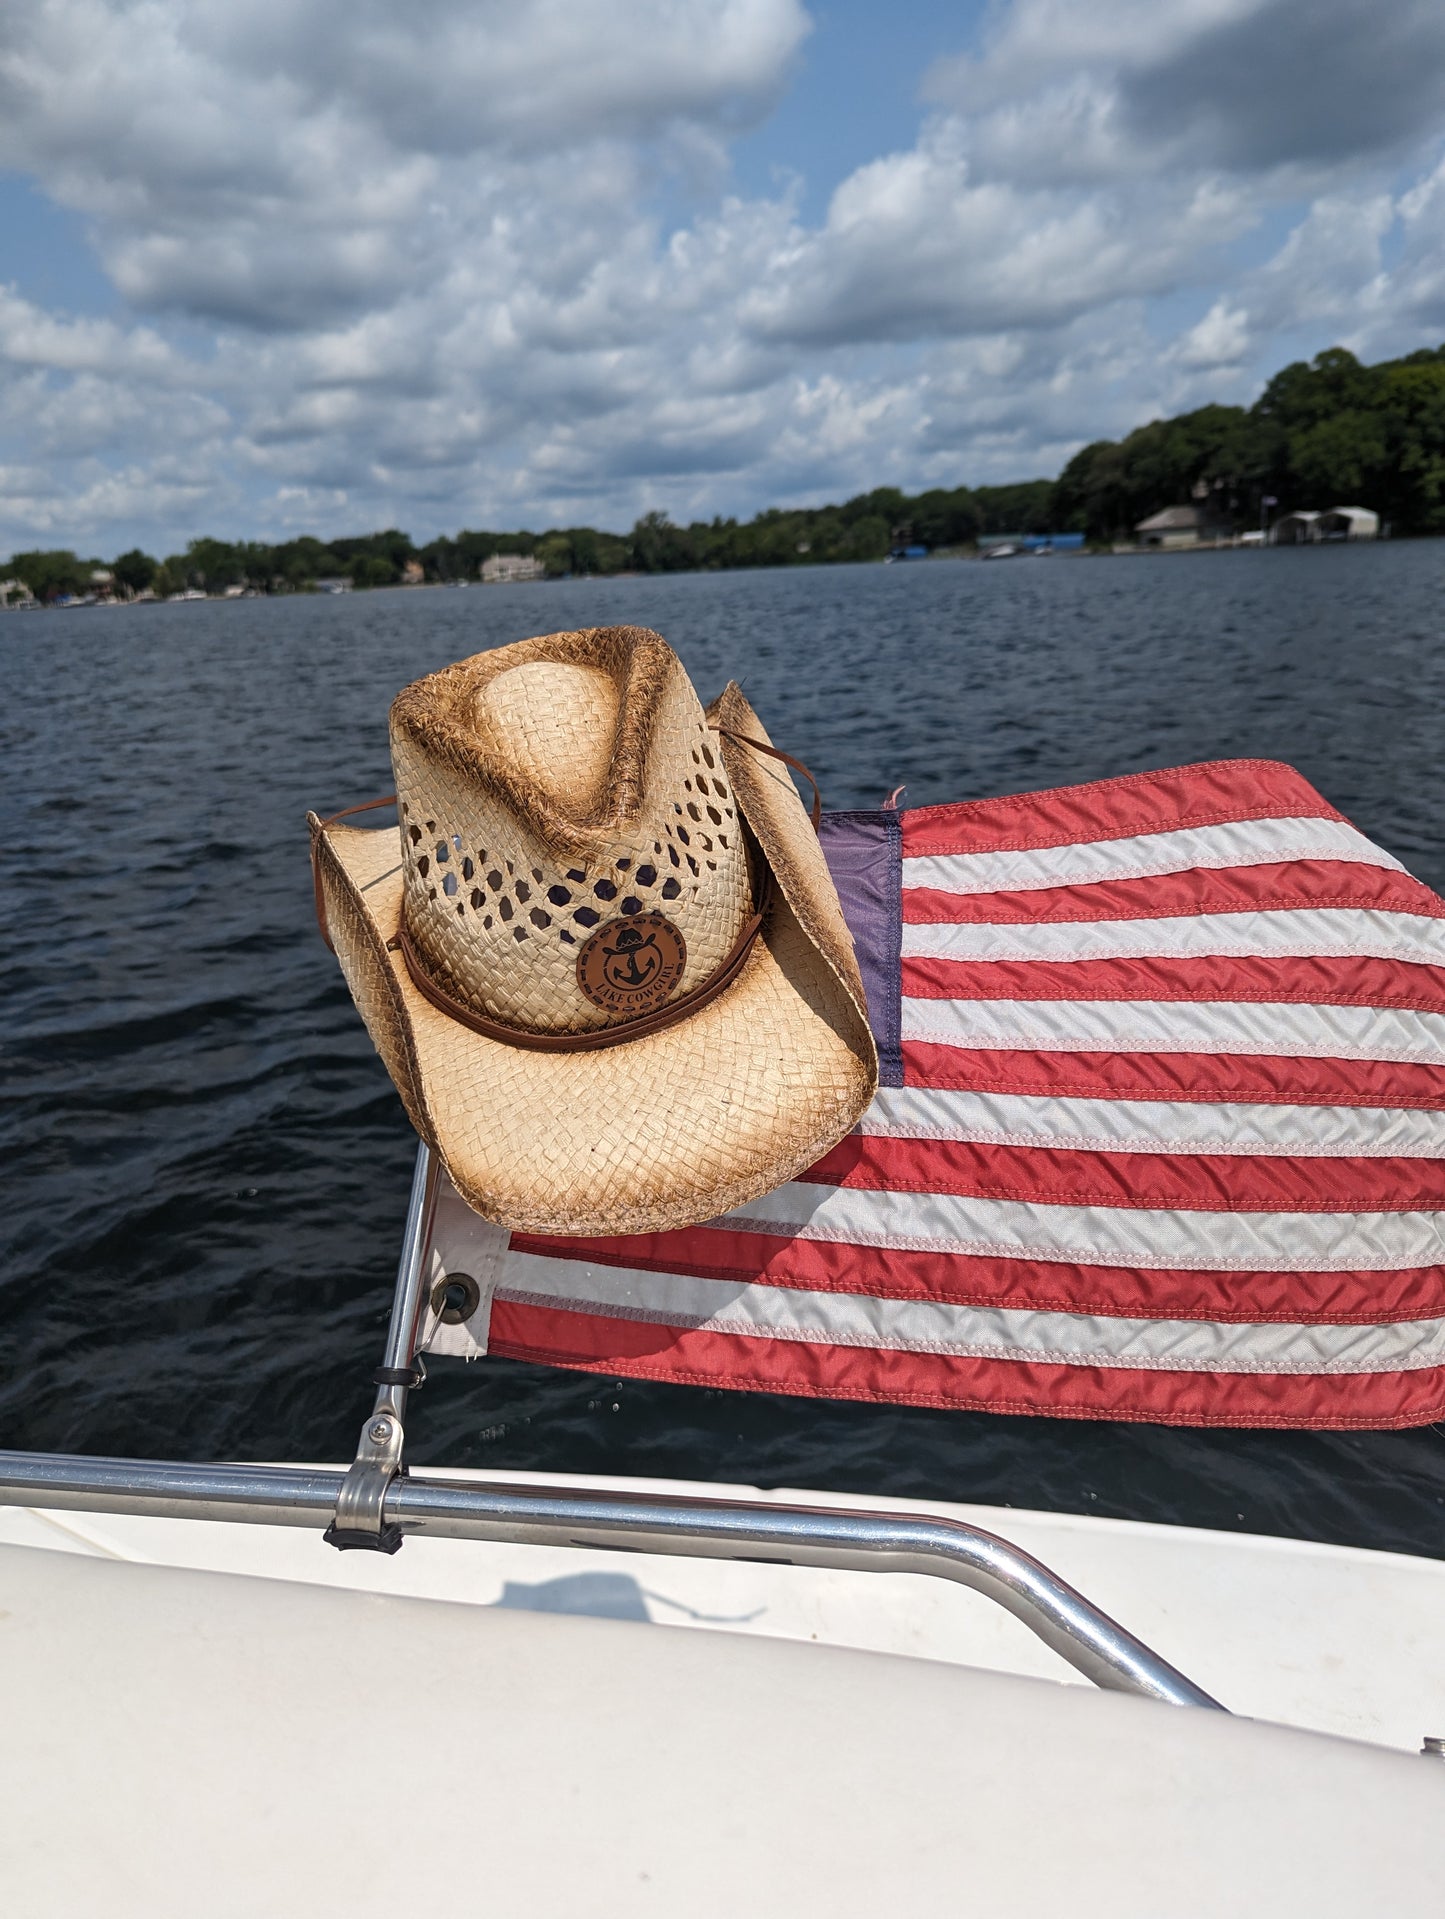 Photo of the Lake Cowgirl Signature Cowboy Hat shown sitting atop the boat flag on the back of a Sea Ray boat. Photo was taken on Lake Minnetonka.